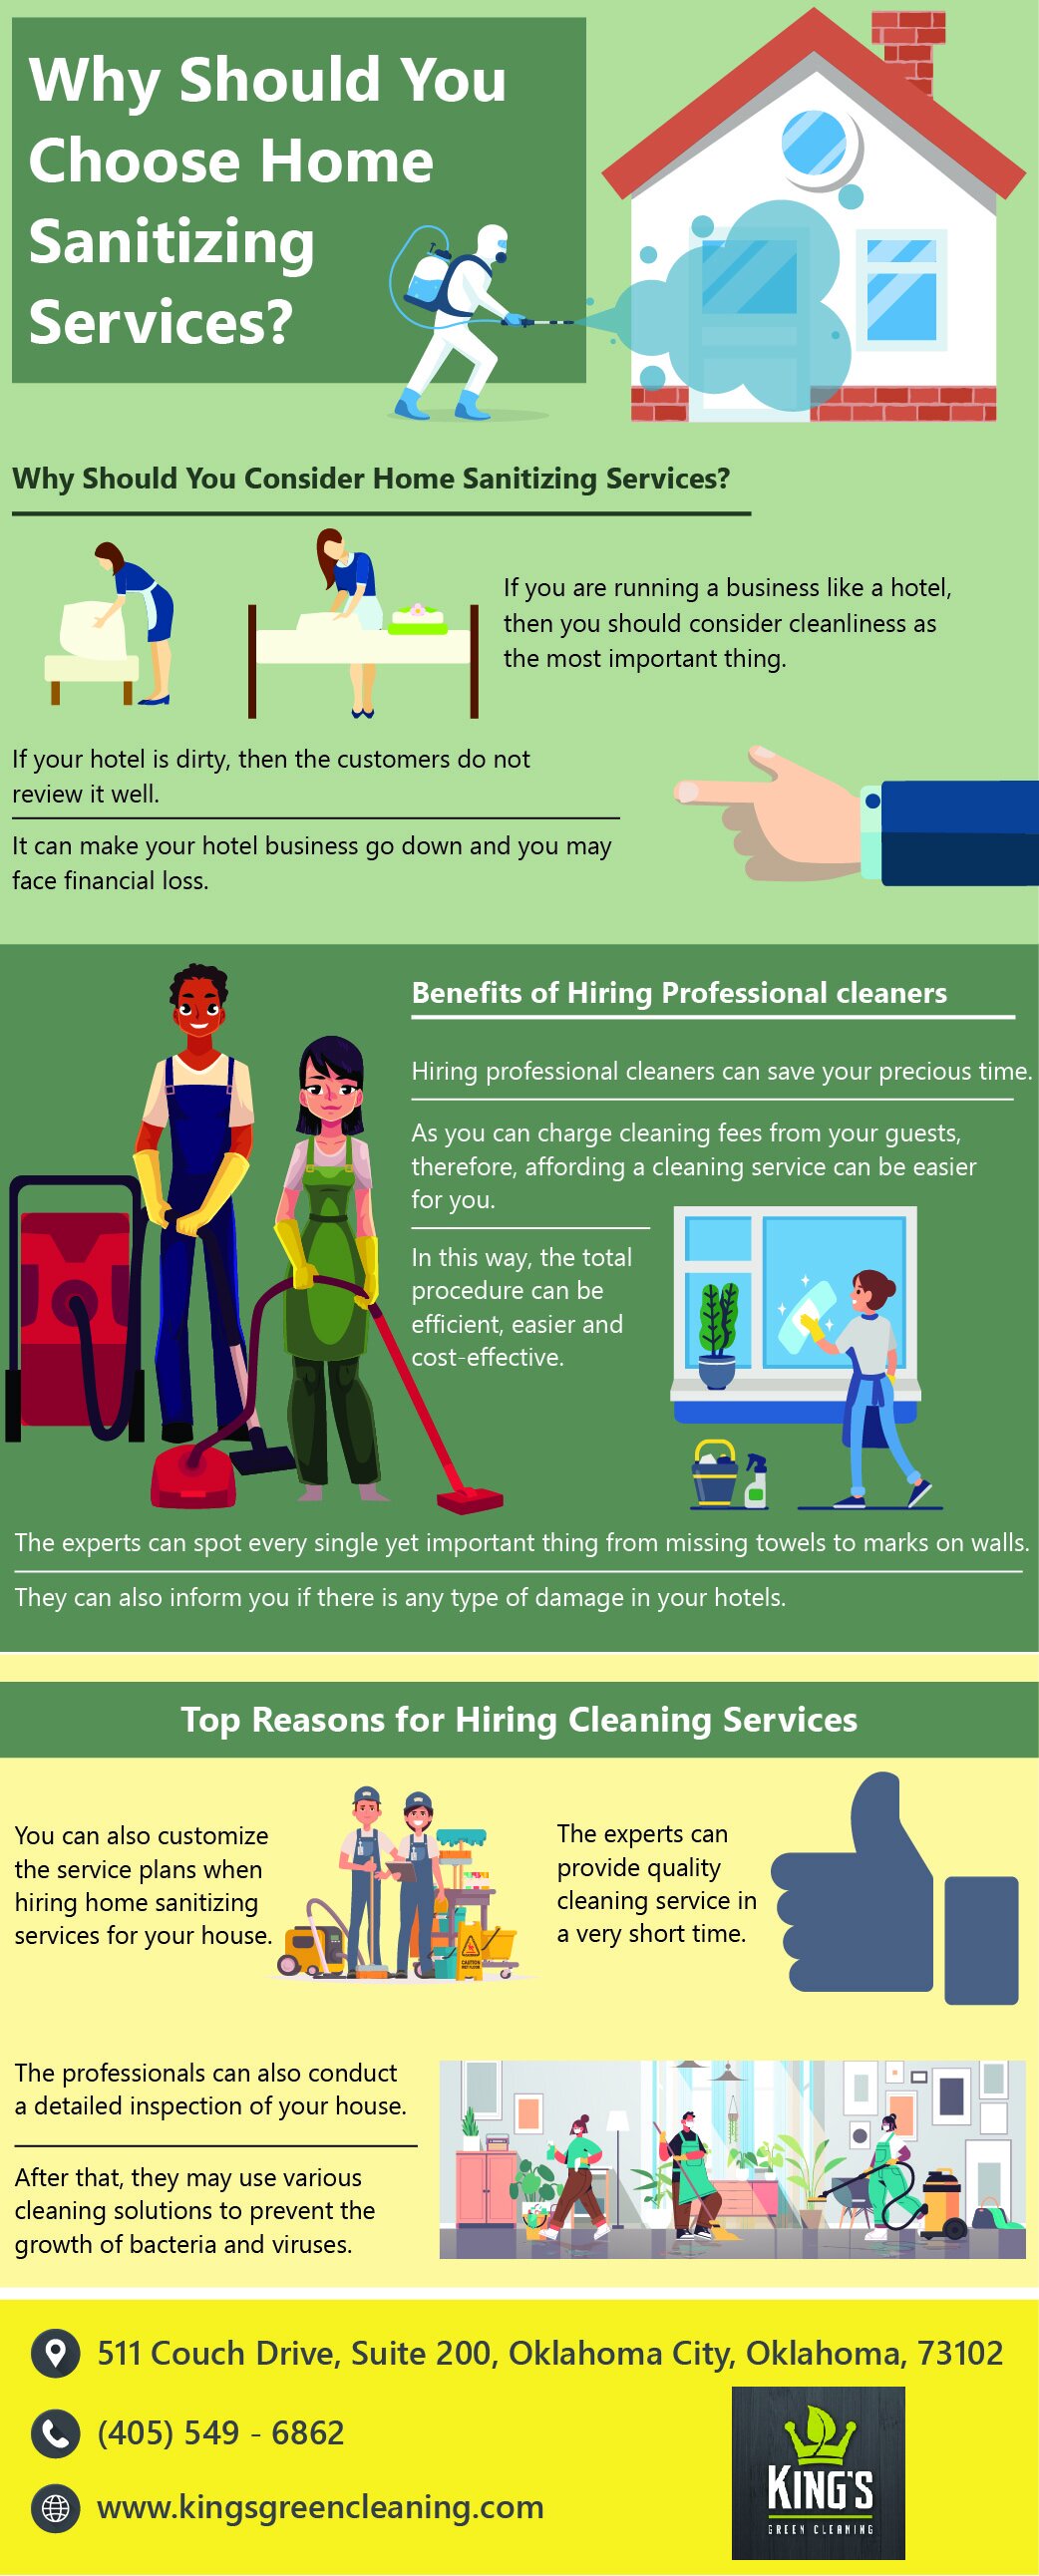 4 Benefits of Home Cleaning Services